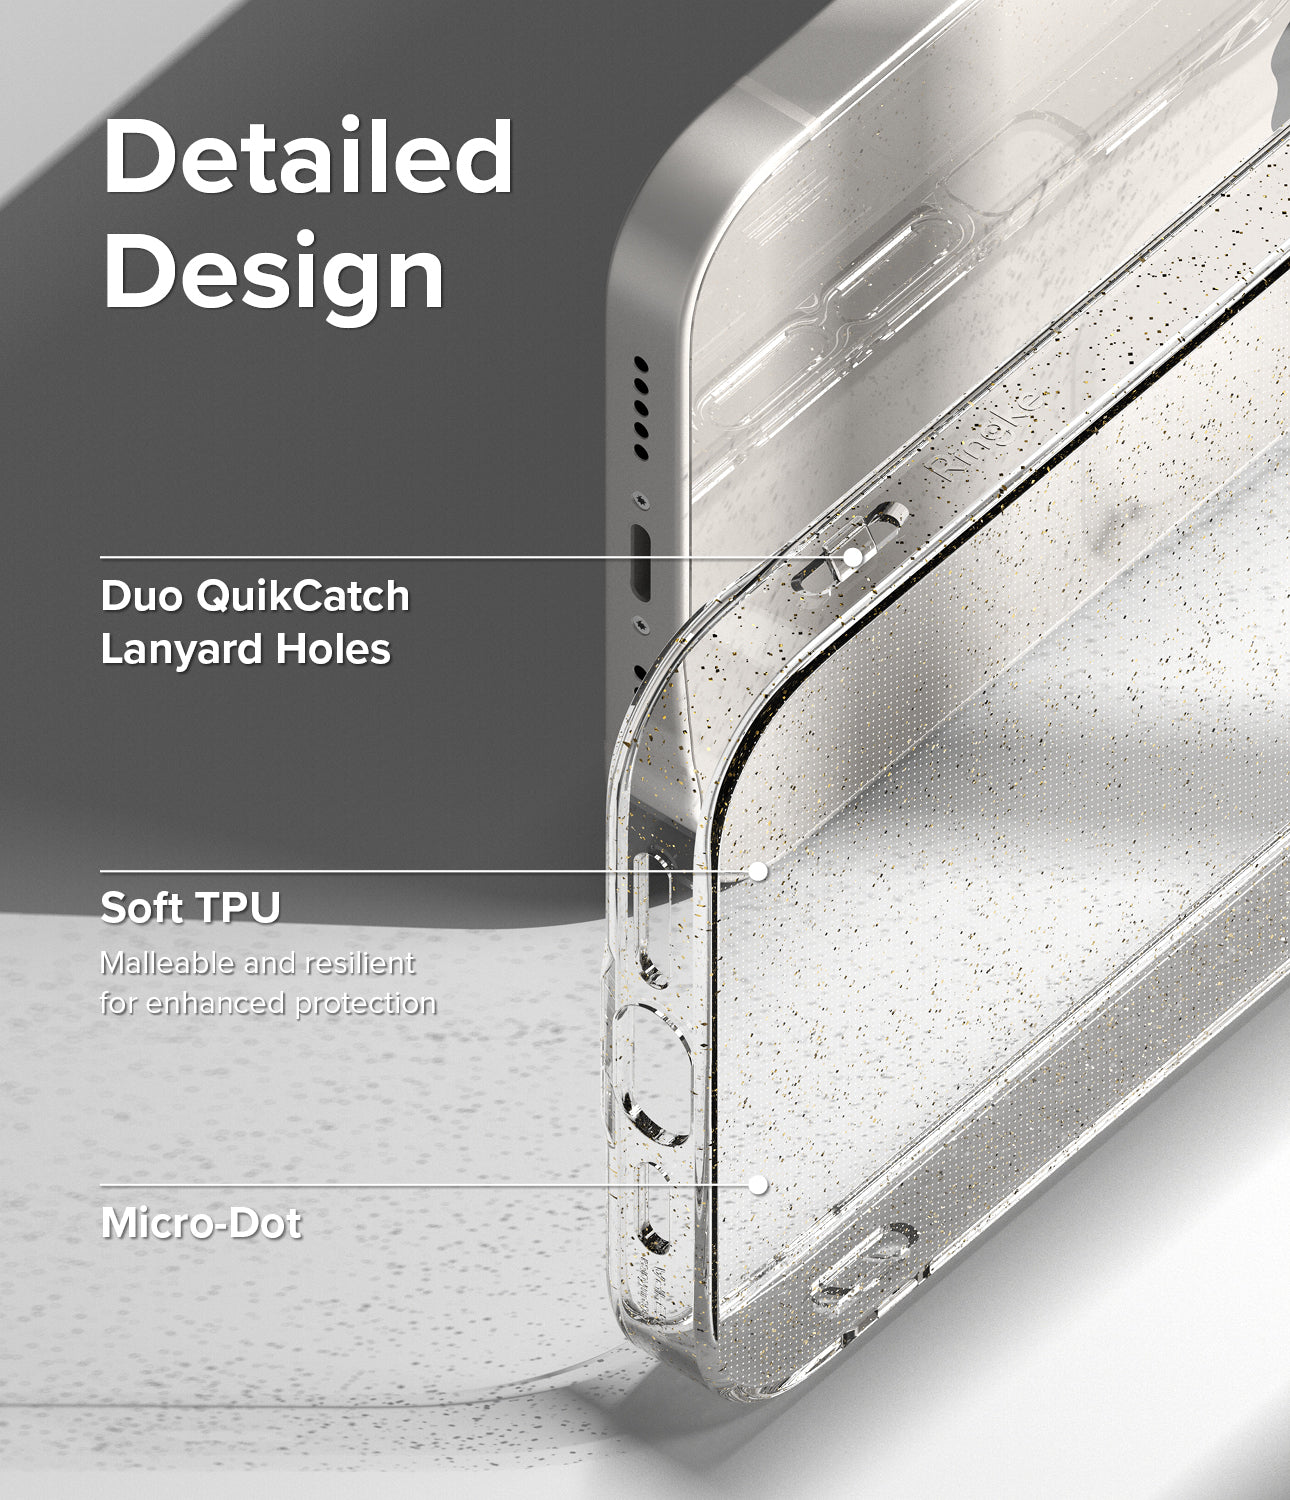 iPhone 14 Case | Air - Glitter Clear - Detailed Design. Duo QuikCatch Lanyard Holes. Malleable and resilient for enhanced protection with Soft TPU. Micro-Dot